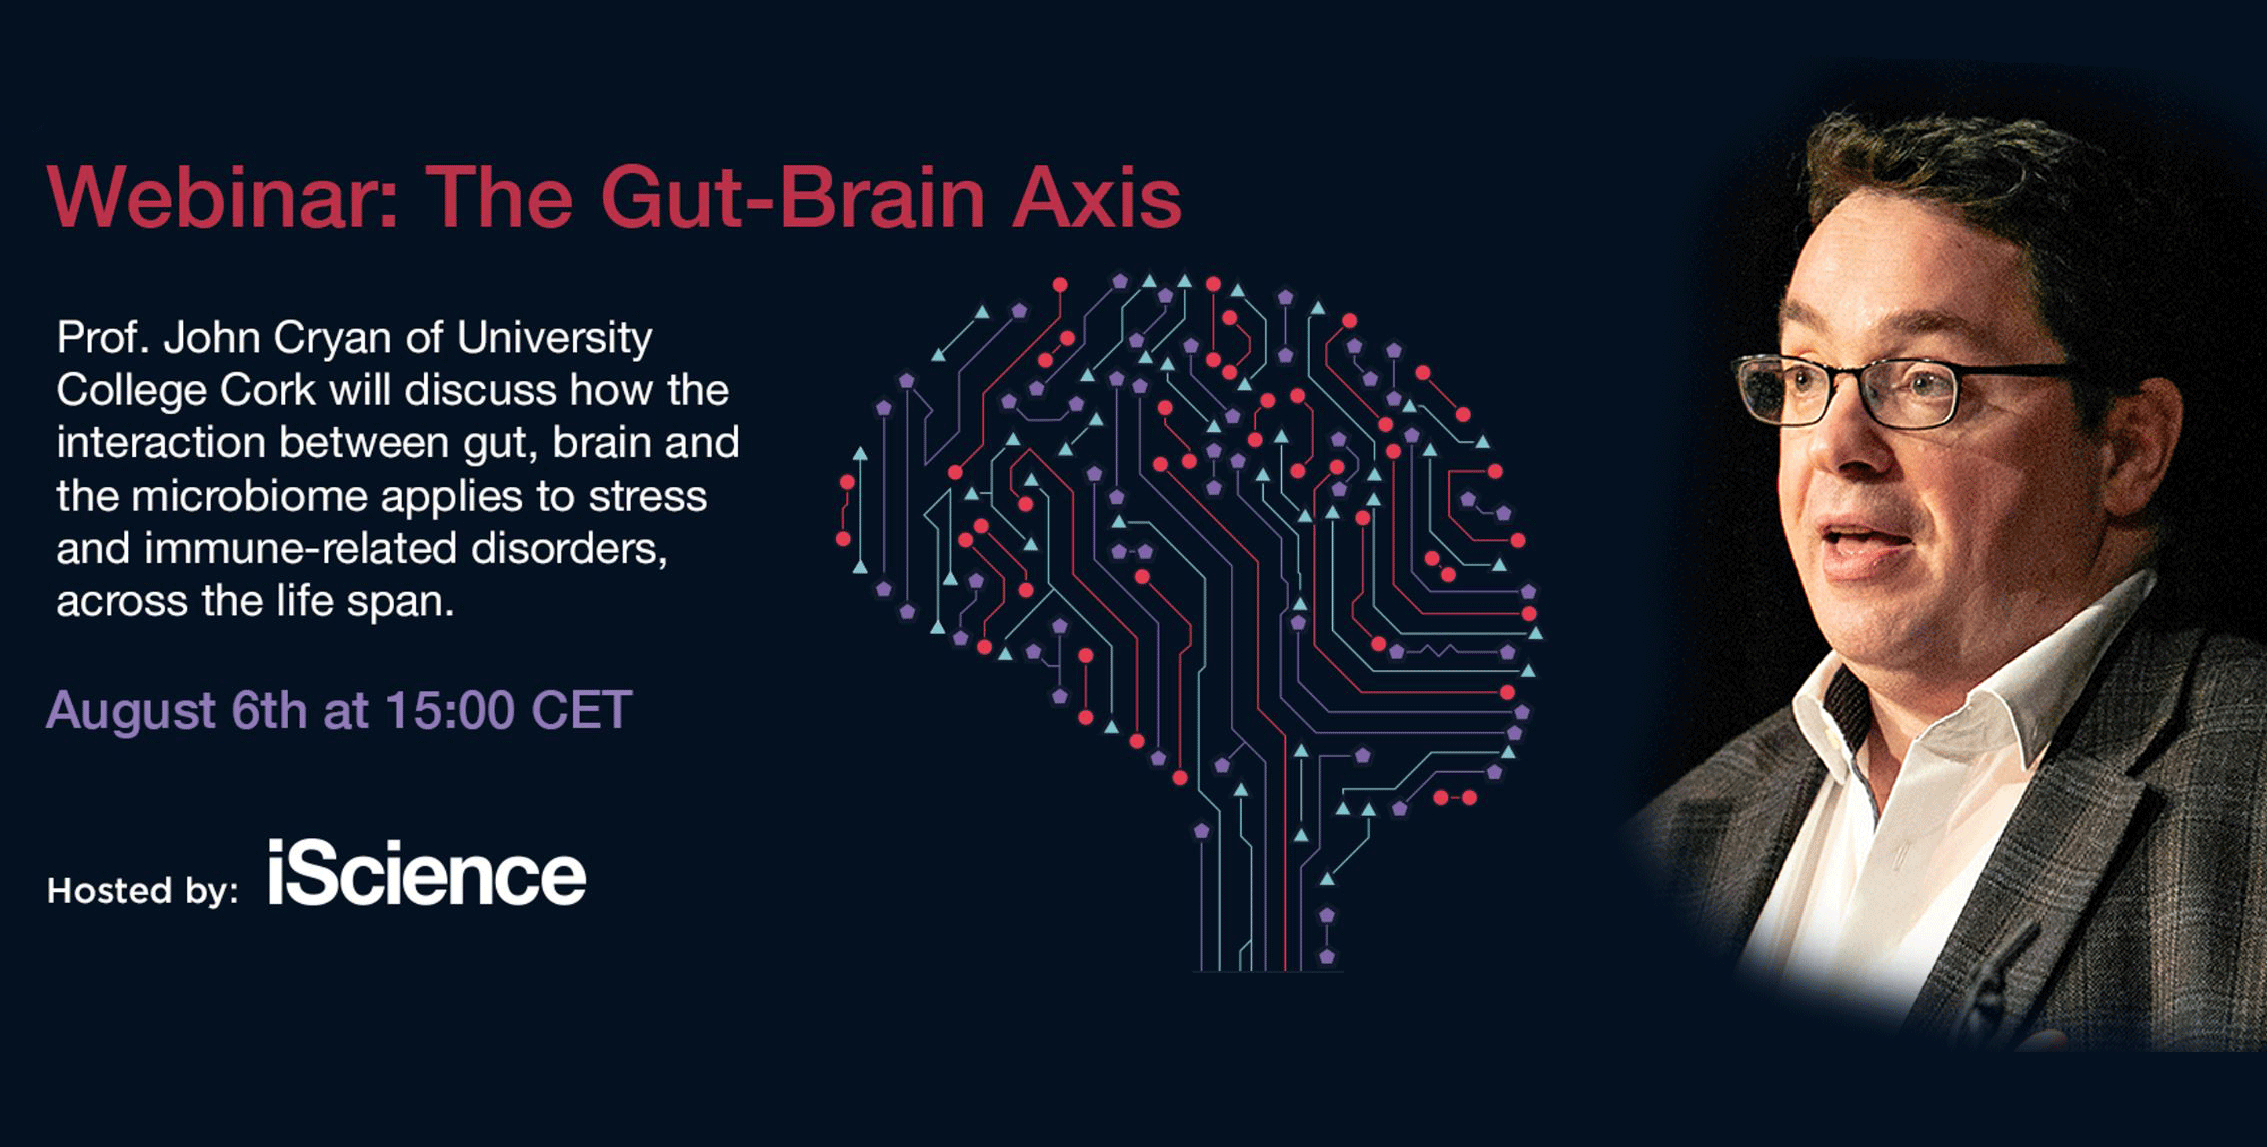  Cell Press Webinar: With Prof Cryan 'The Gut Brain Axis'. August 6th 2020 at 15:00 CET